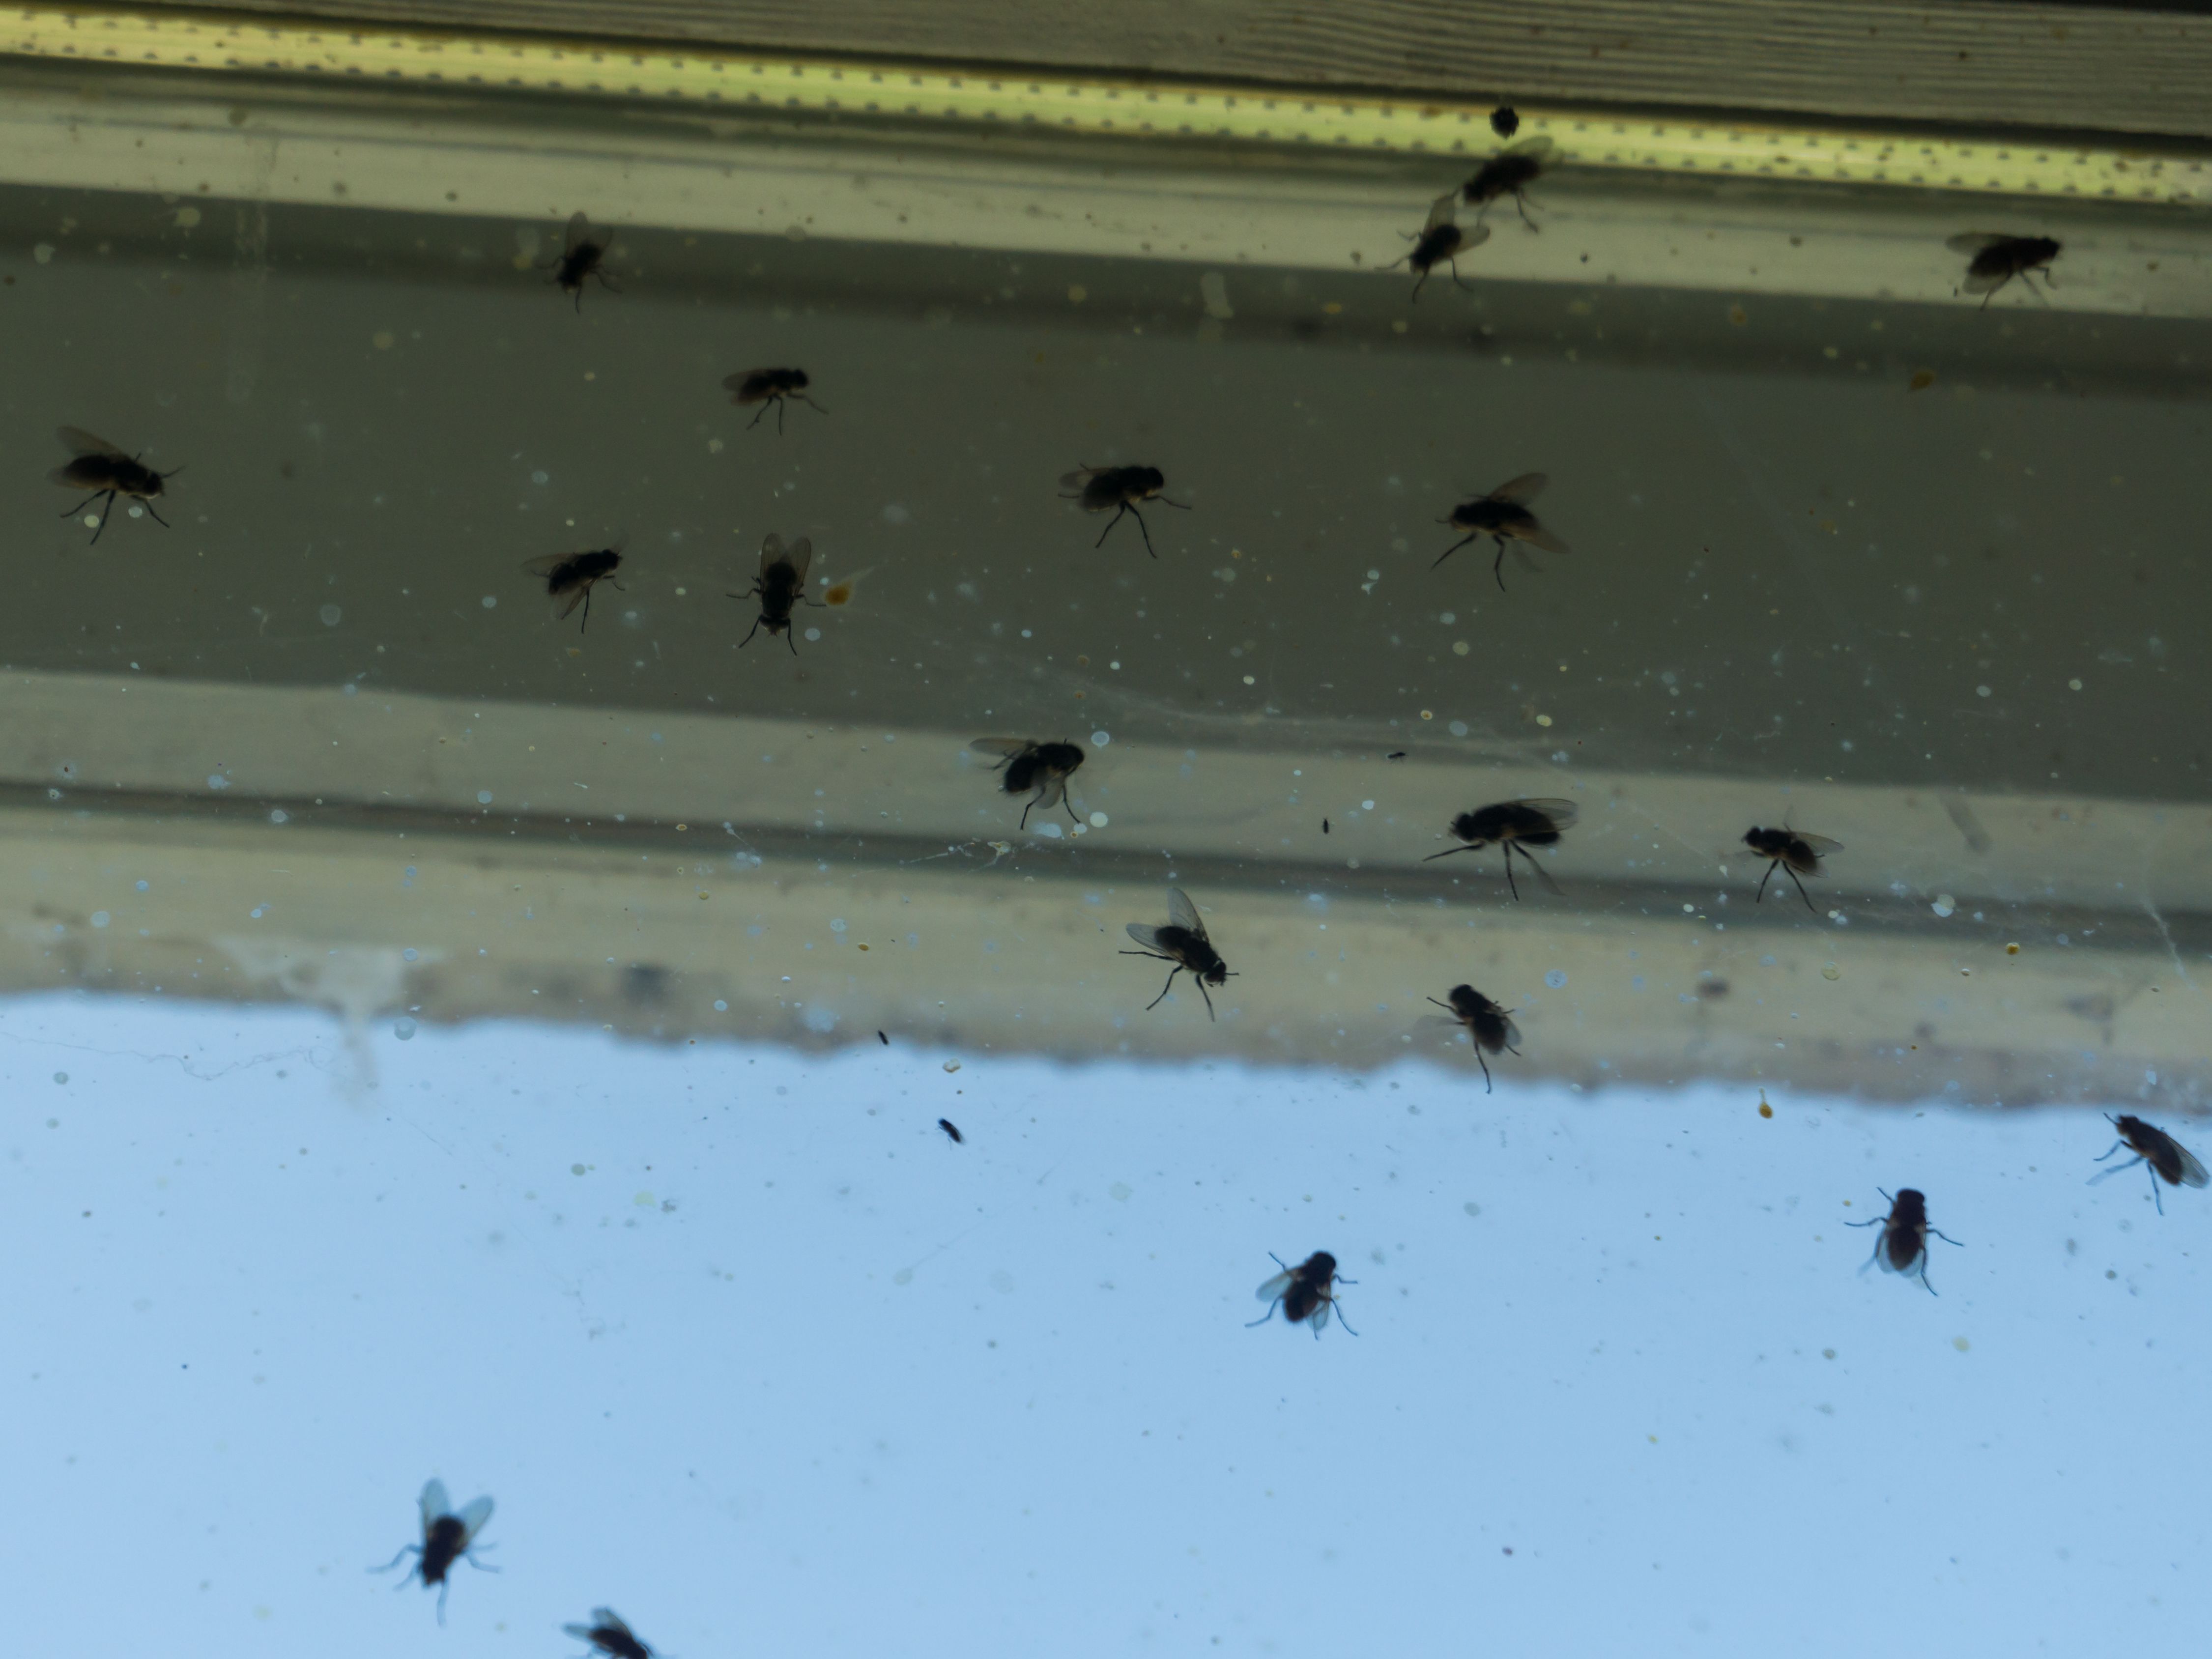 How To Get Rid Of House Flies